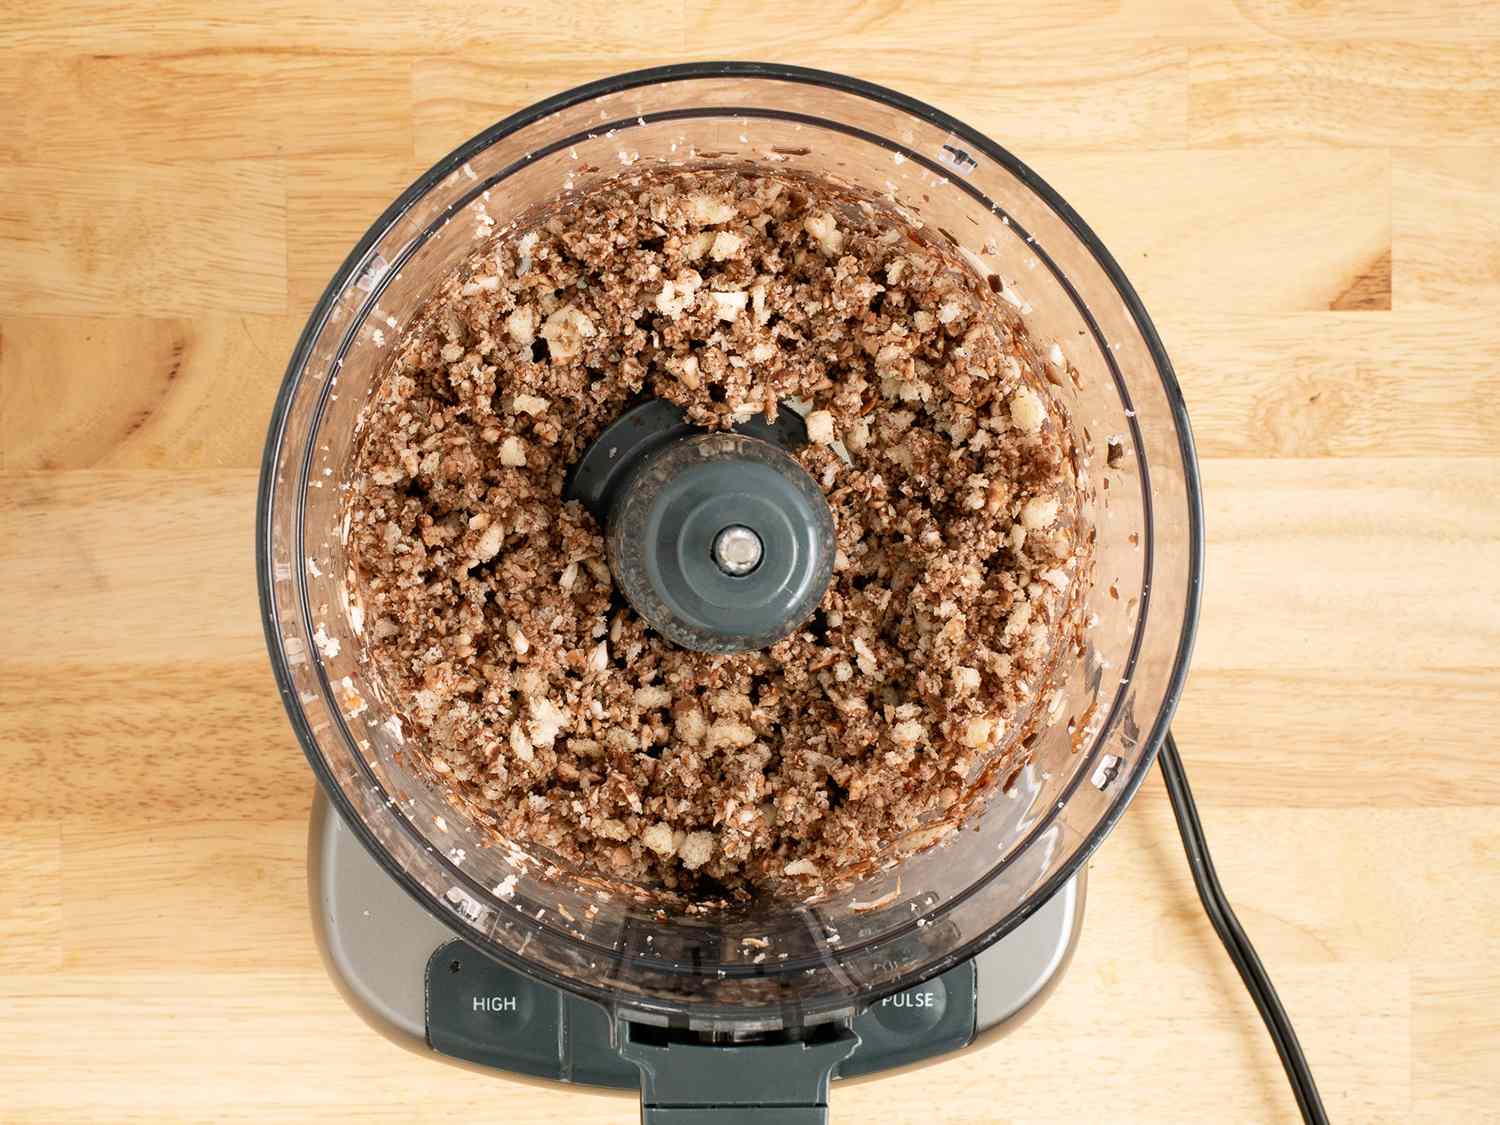 Bread and mushrooms in a food processor